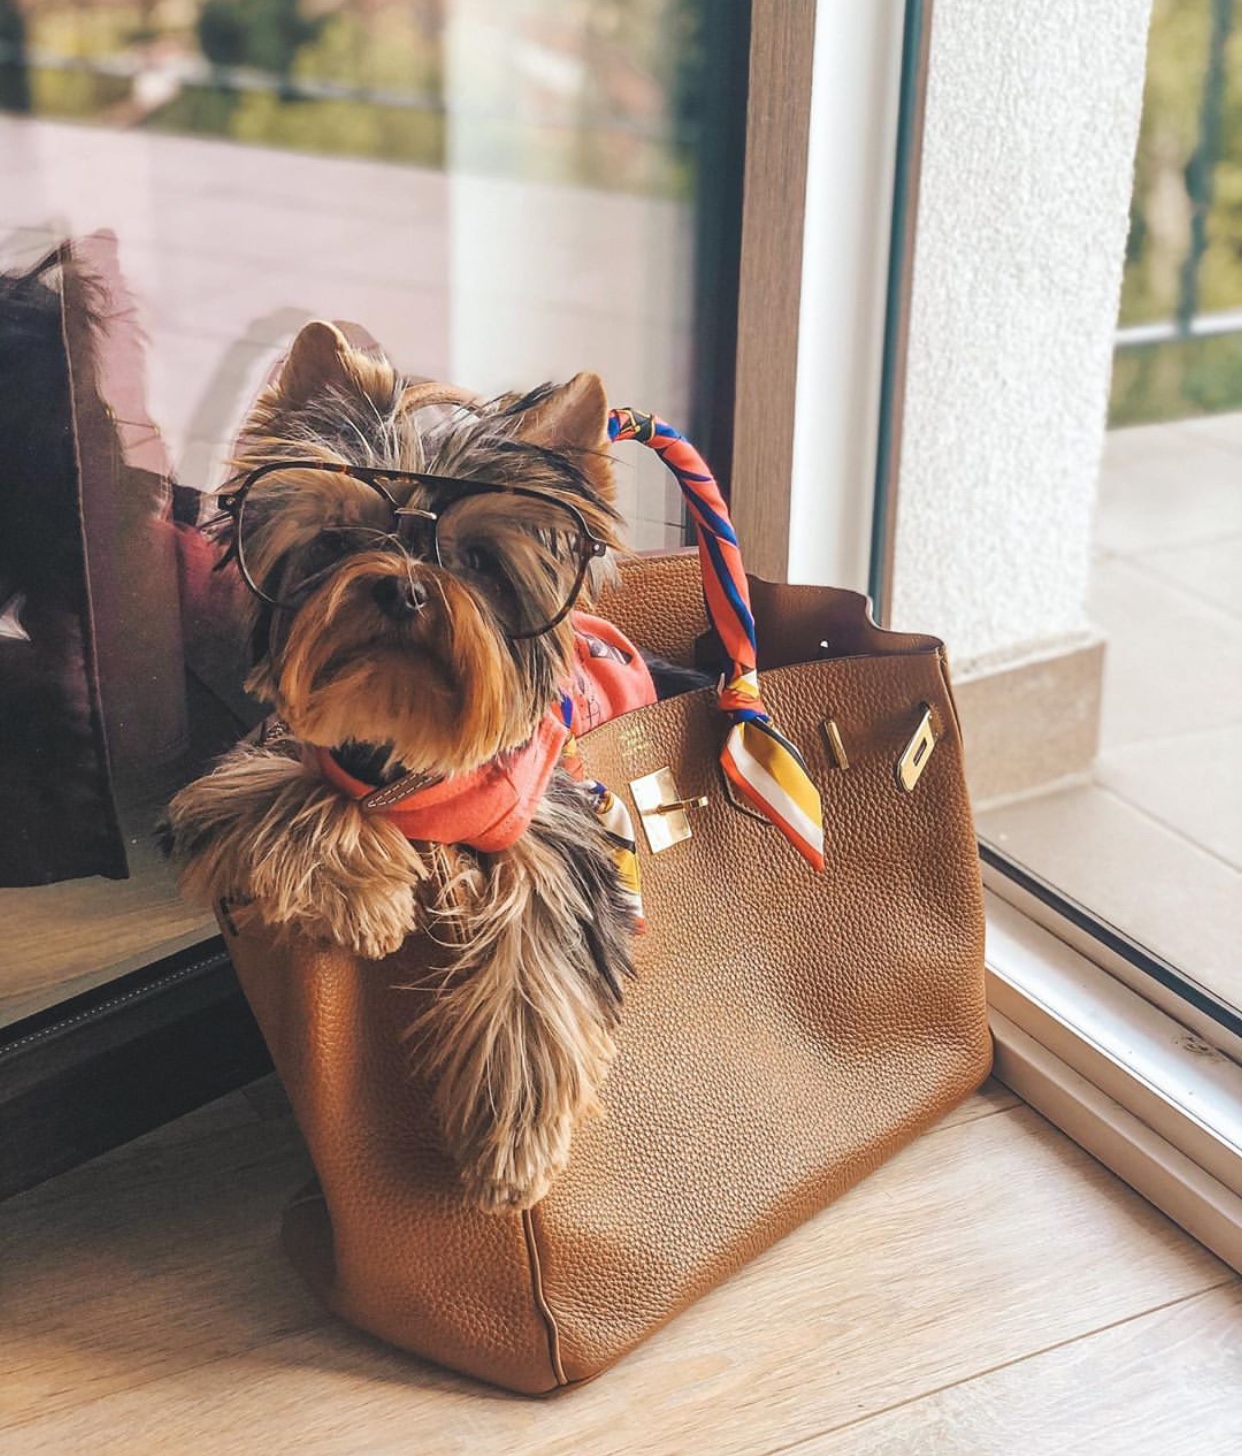 A Yorkshire Terrier in a bag while wearing glasses